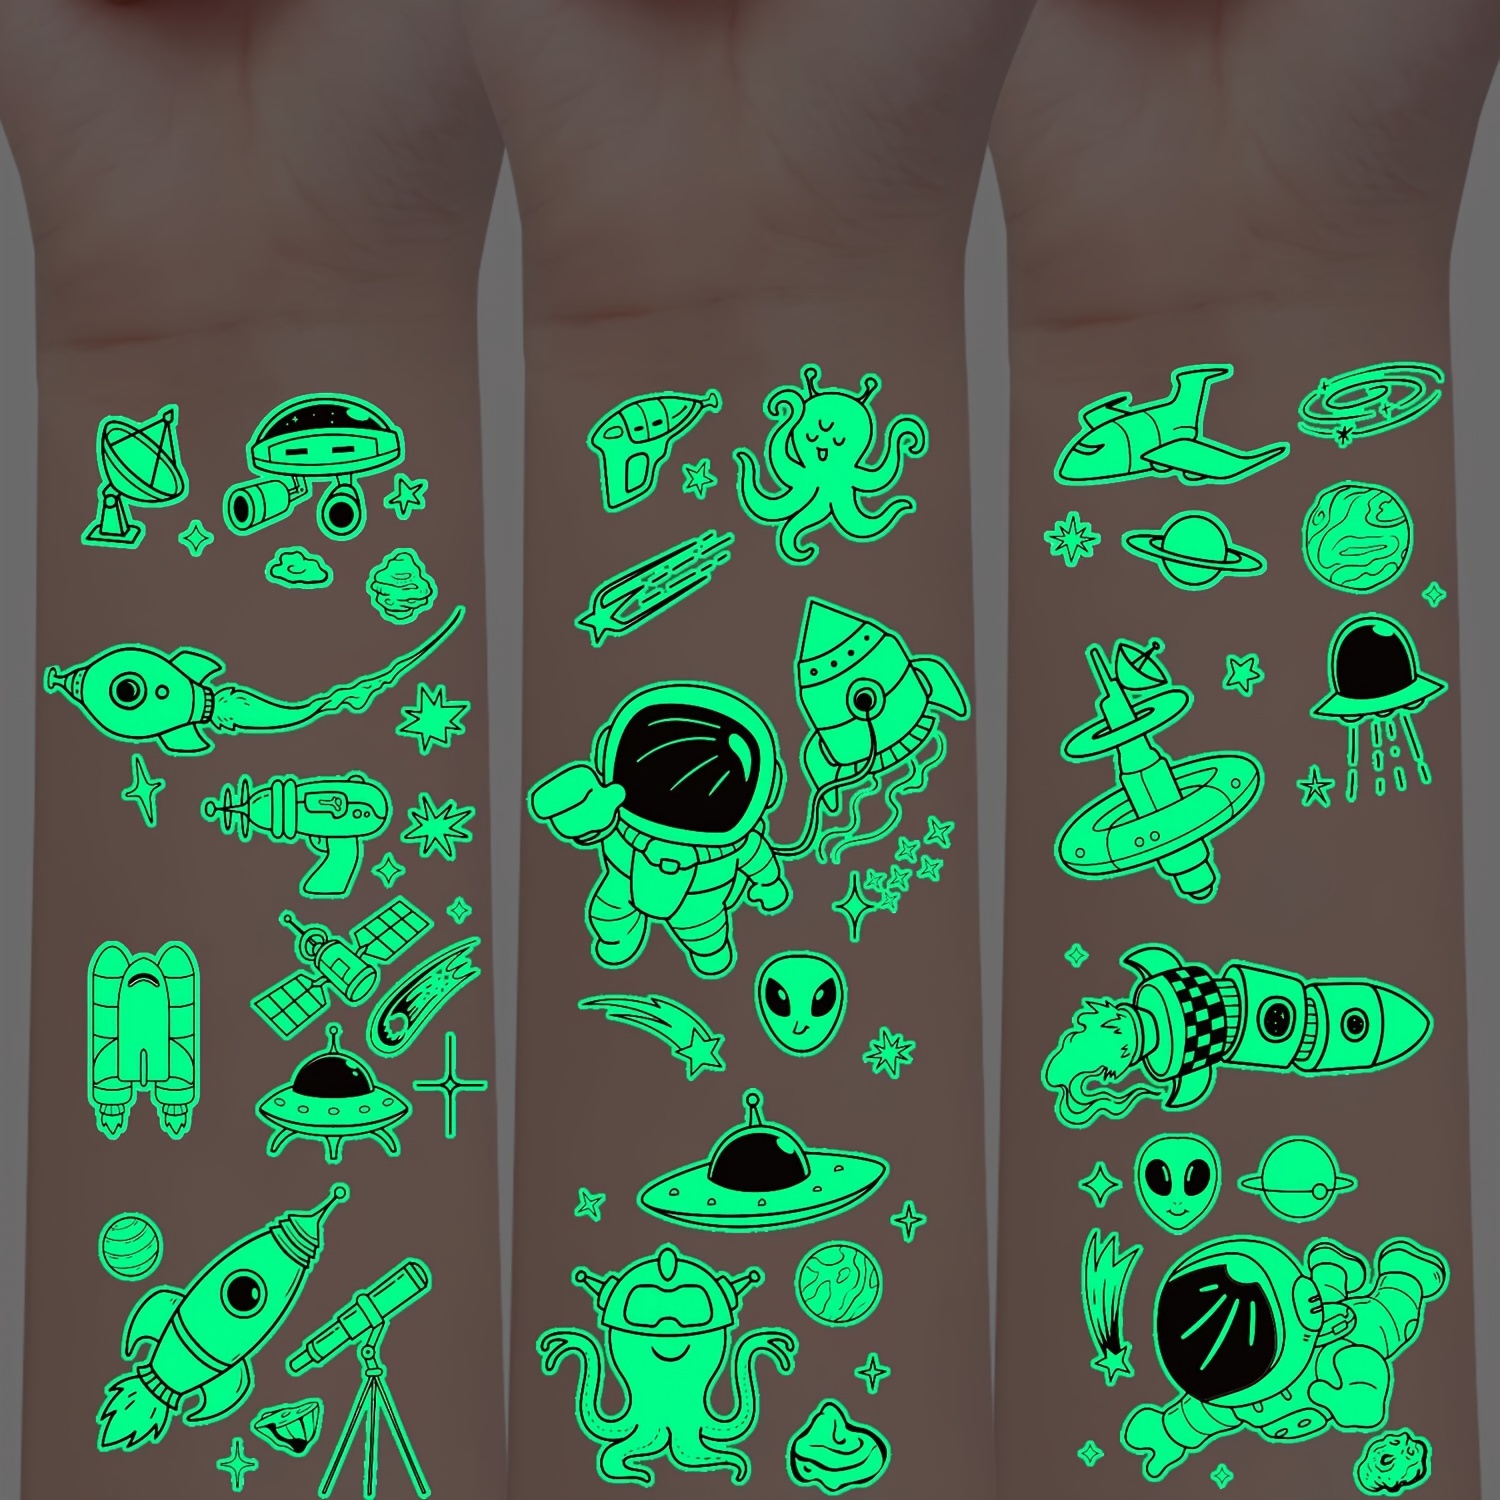 

10-piece Glow-in-the-dark Space Temporary Tattoos - 300+ Spaceship, Planet, Rocket, Alien & Astronaut Designs | Waterproof & Luminous For Face, Body, Arms, Neck | Artistic Fake Tattoo Stickers